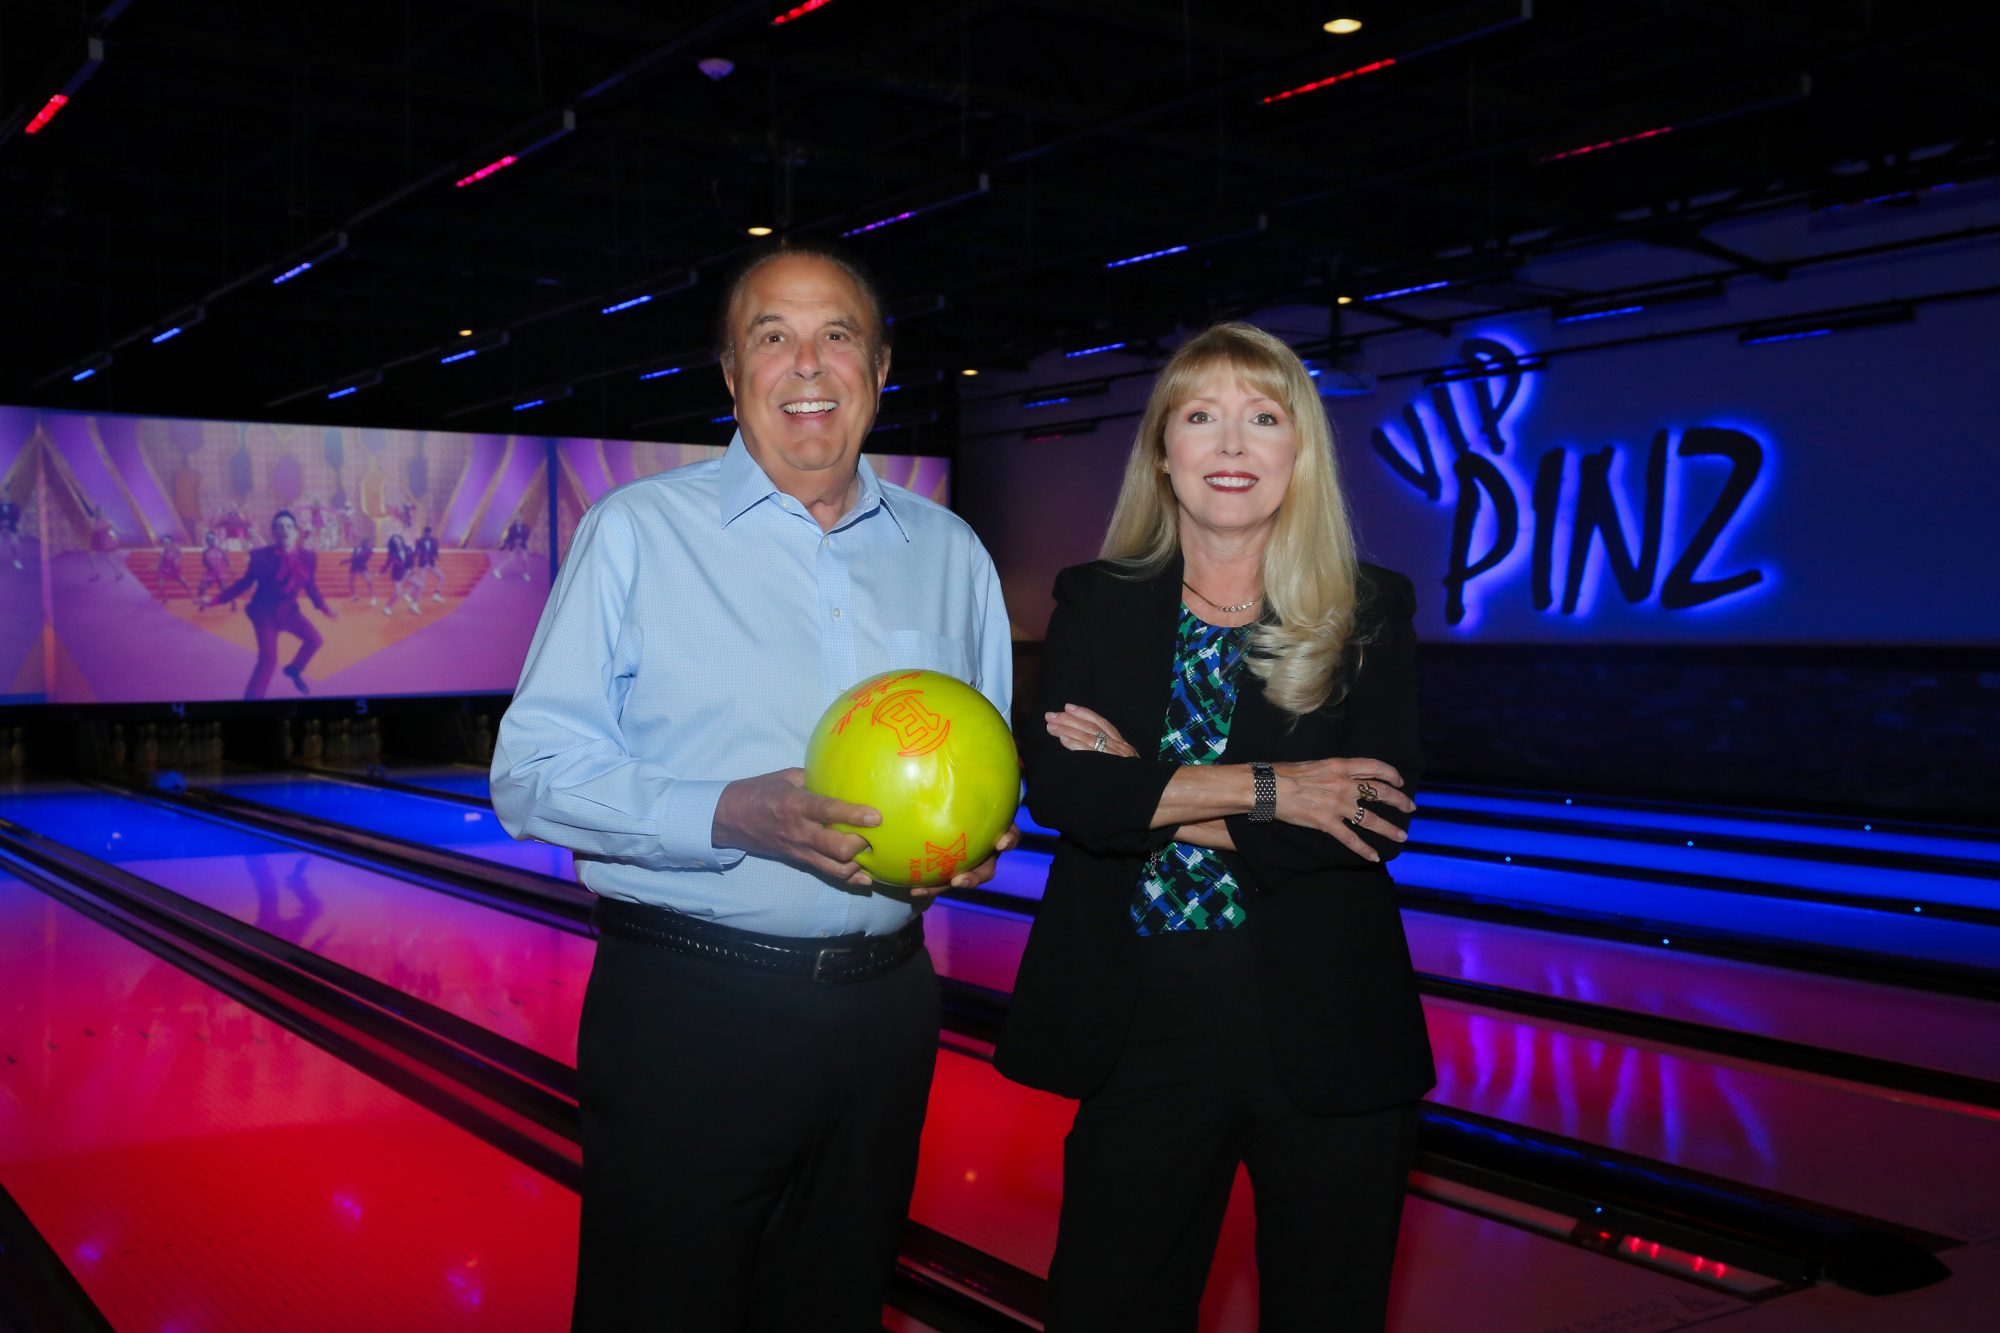 Through Fort Myers-based Bowling Management Associates, Pat and Lisa Ciniello operate six bowling centers in Southwest Florida under the Bowland & HeadPinz Entertainment Centers brands.